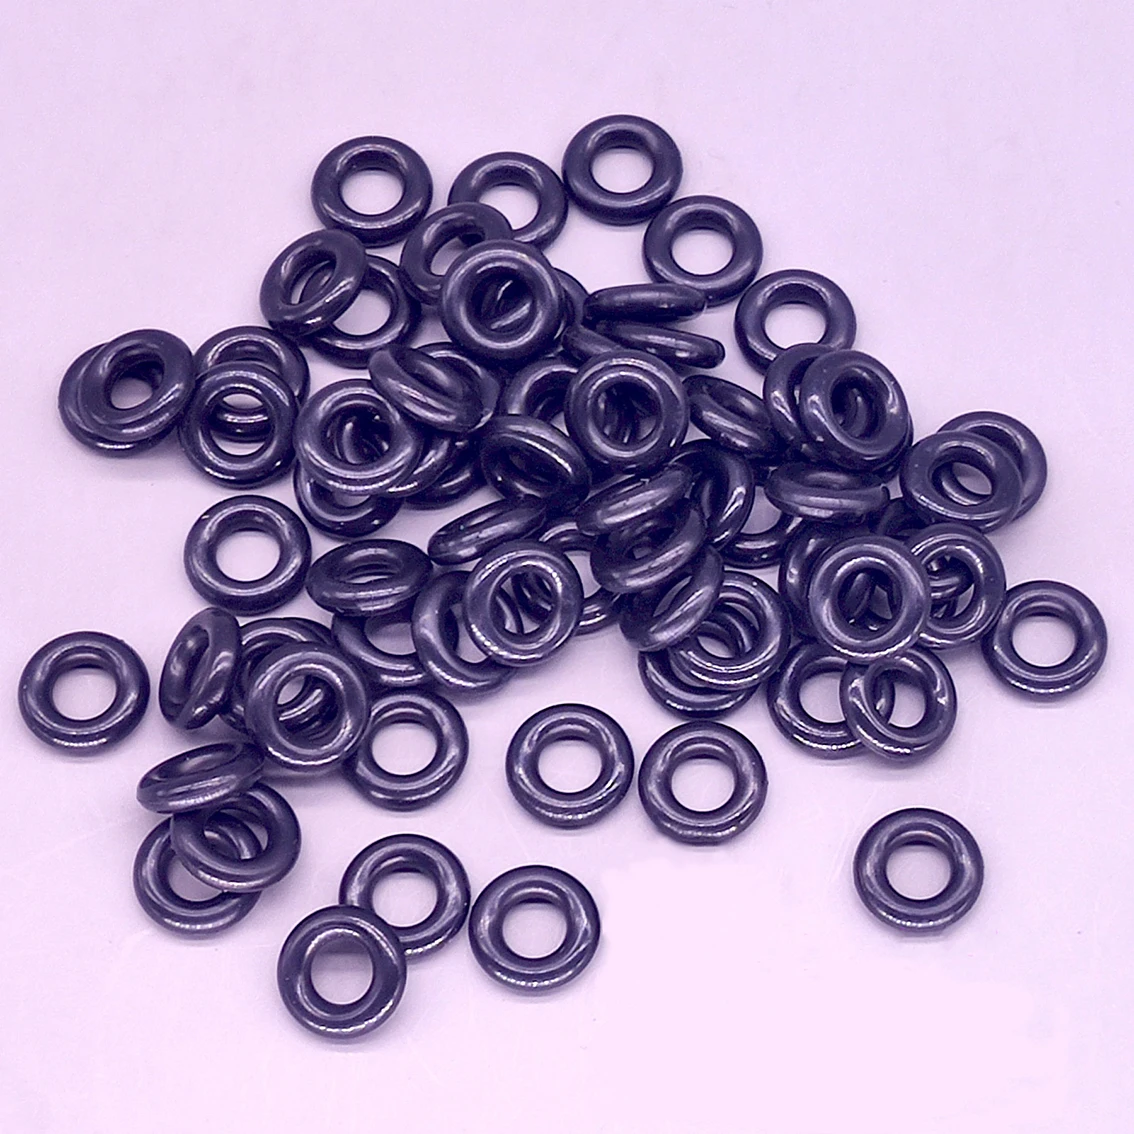 Nitrile Rubber O-Ring CS 3mm NBR Oring Seal Sealing OD 9mm-306mm Oil Resistant 